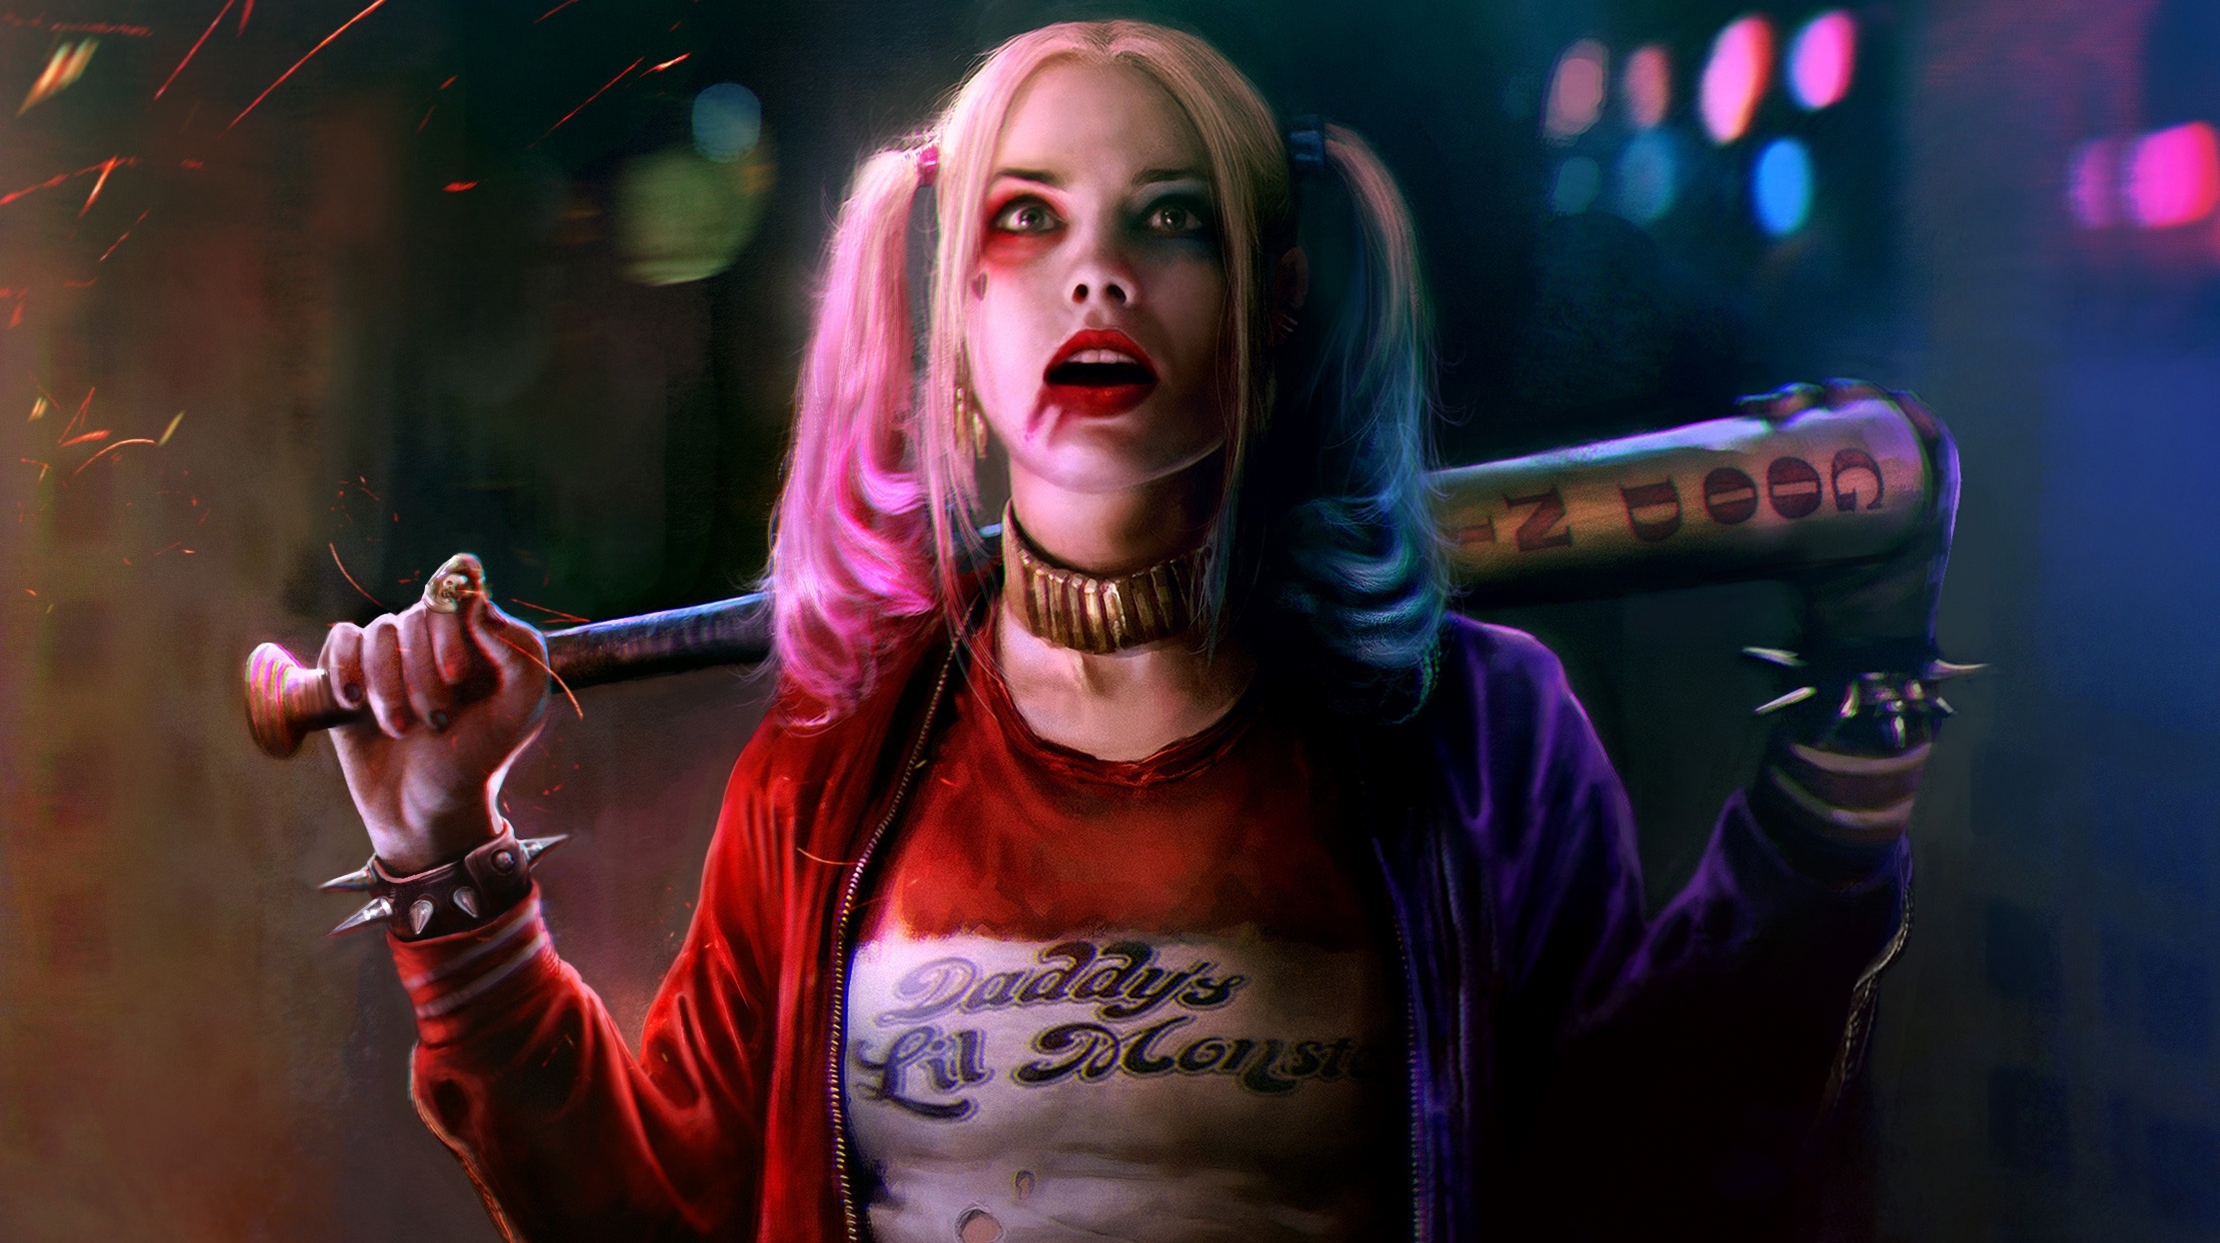 blonde, harley quinn, movie, collar, suicide squad, margot robbie, baseball bat, dc comics, spikes, two toned hair